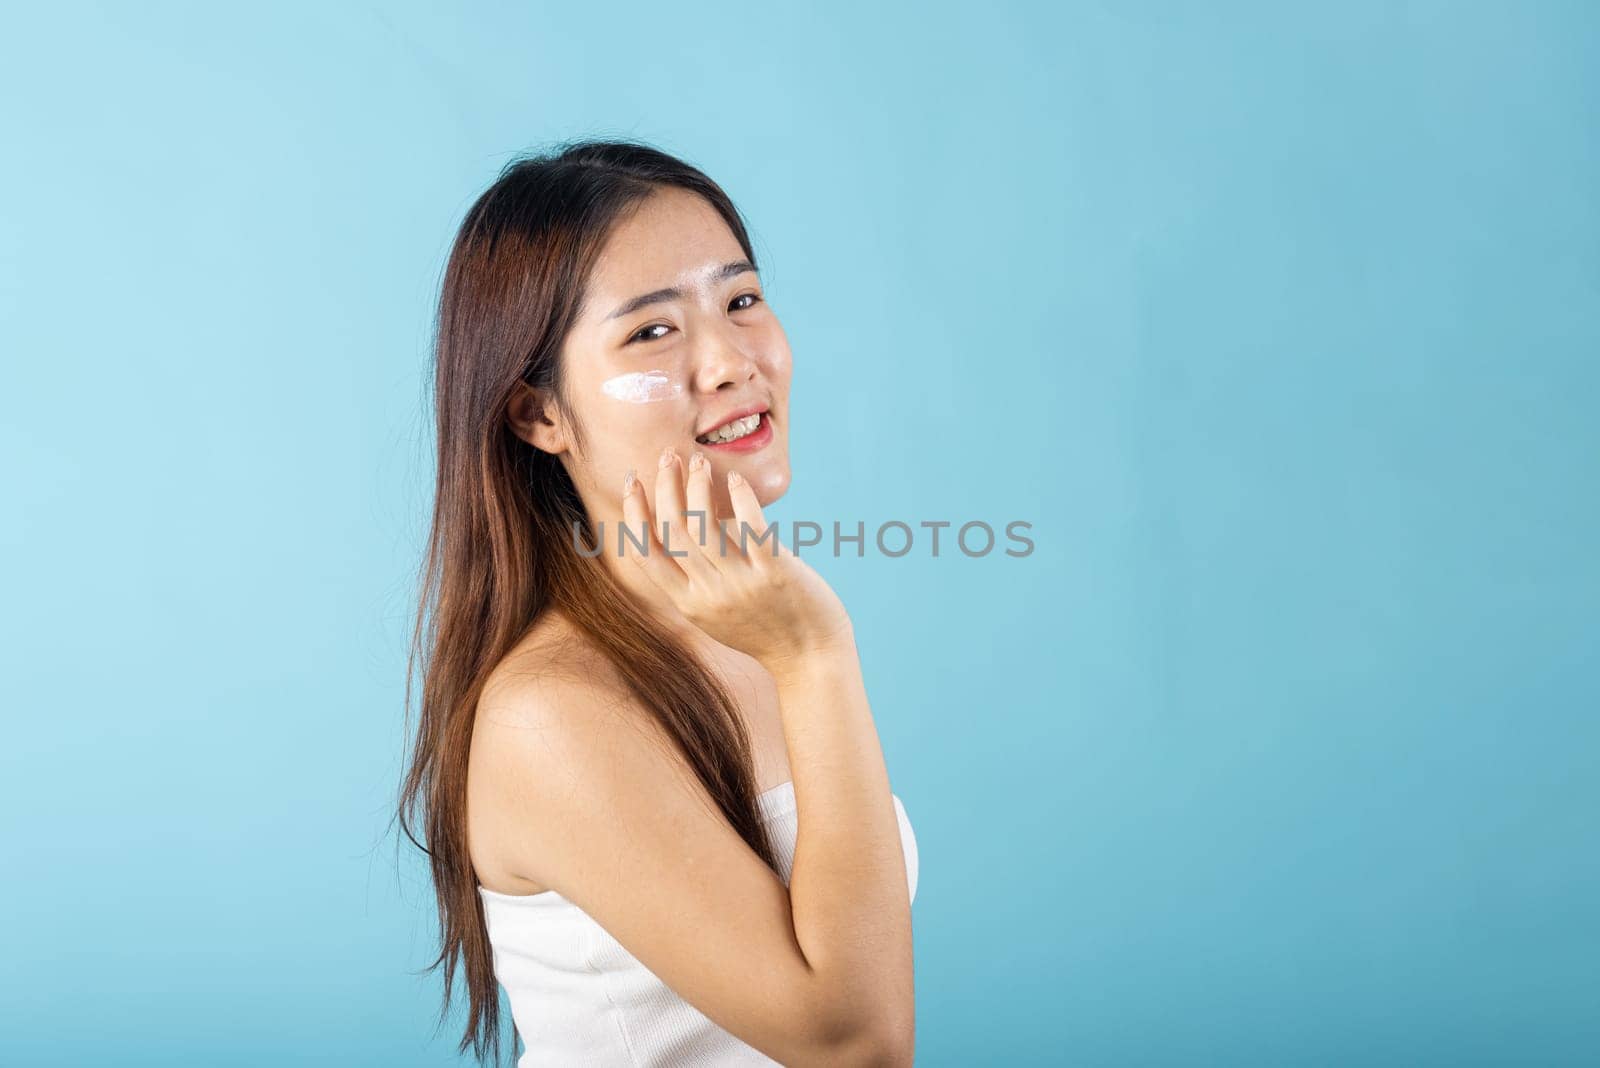 Happy beauty portrait woman gets cream on her cheek, Beautiful young female smiling applying cosmetic cream on her face isolated on blue background, health clean skin, Skin care and beauty concept